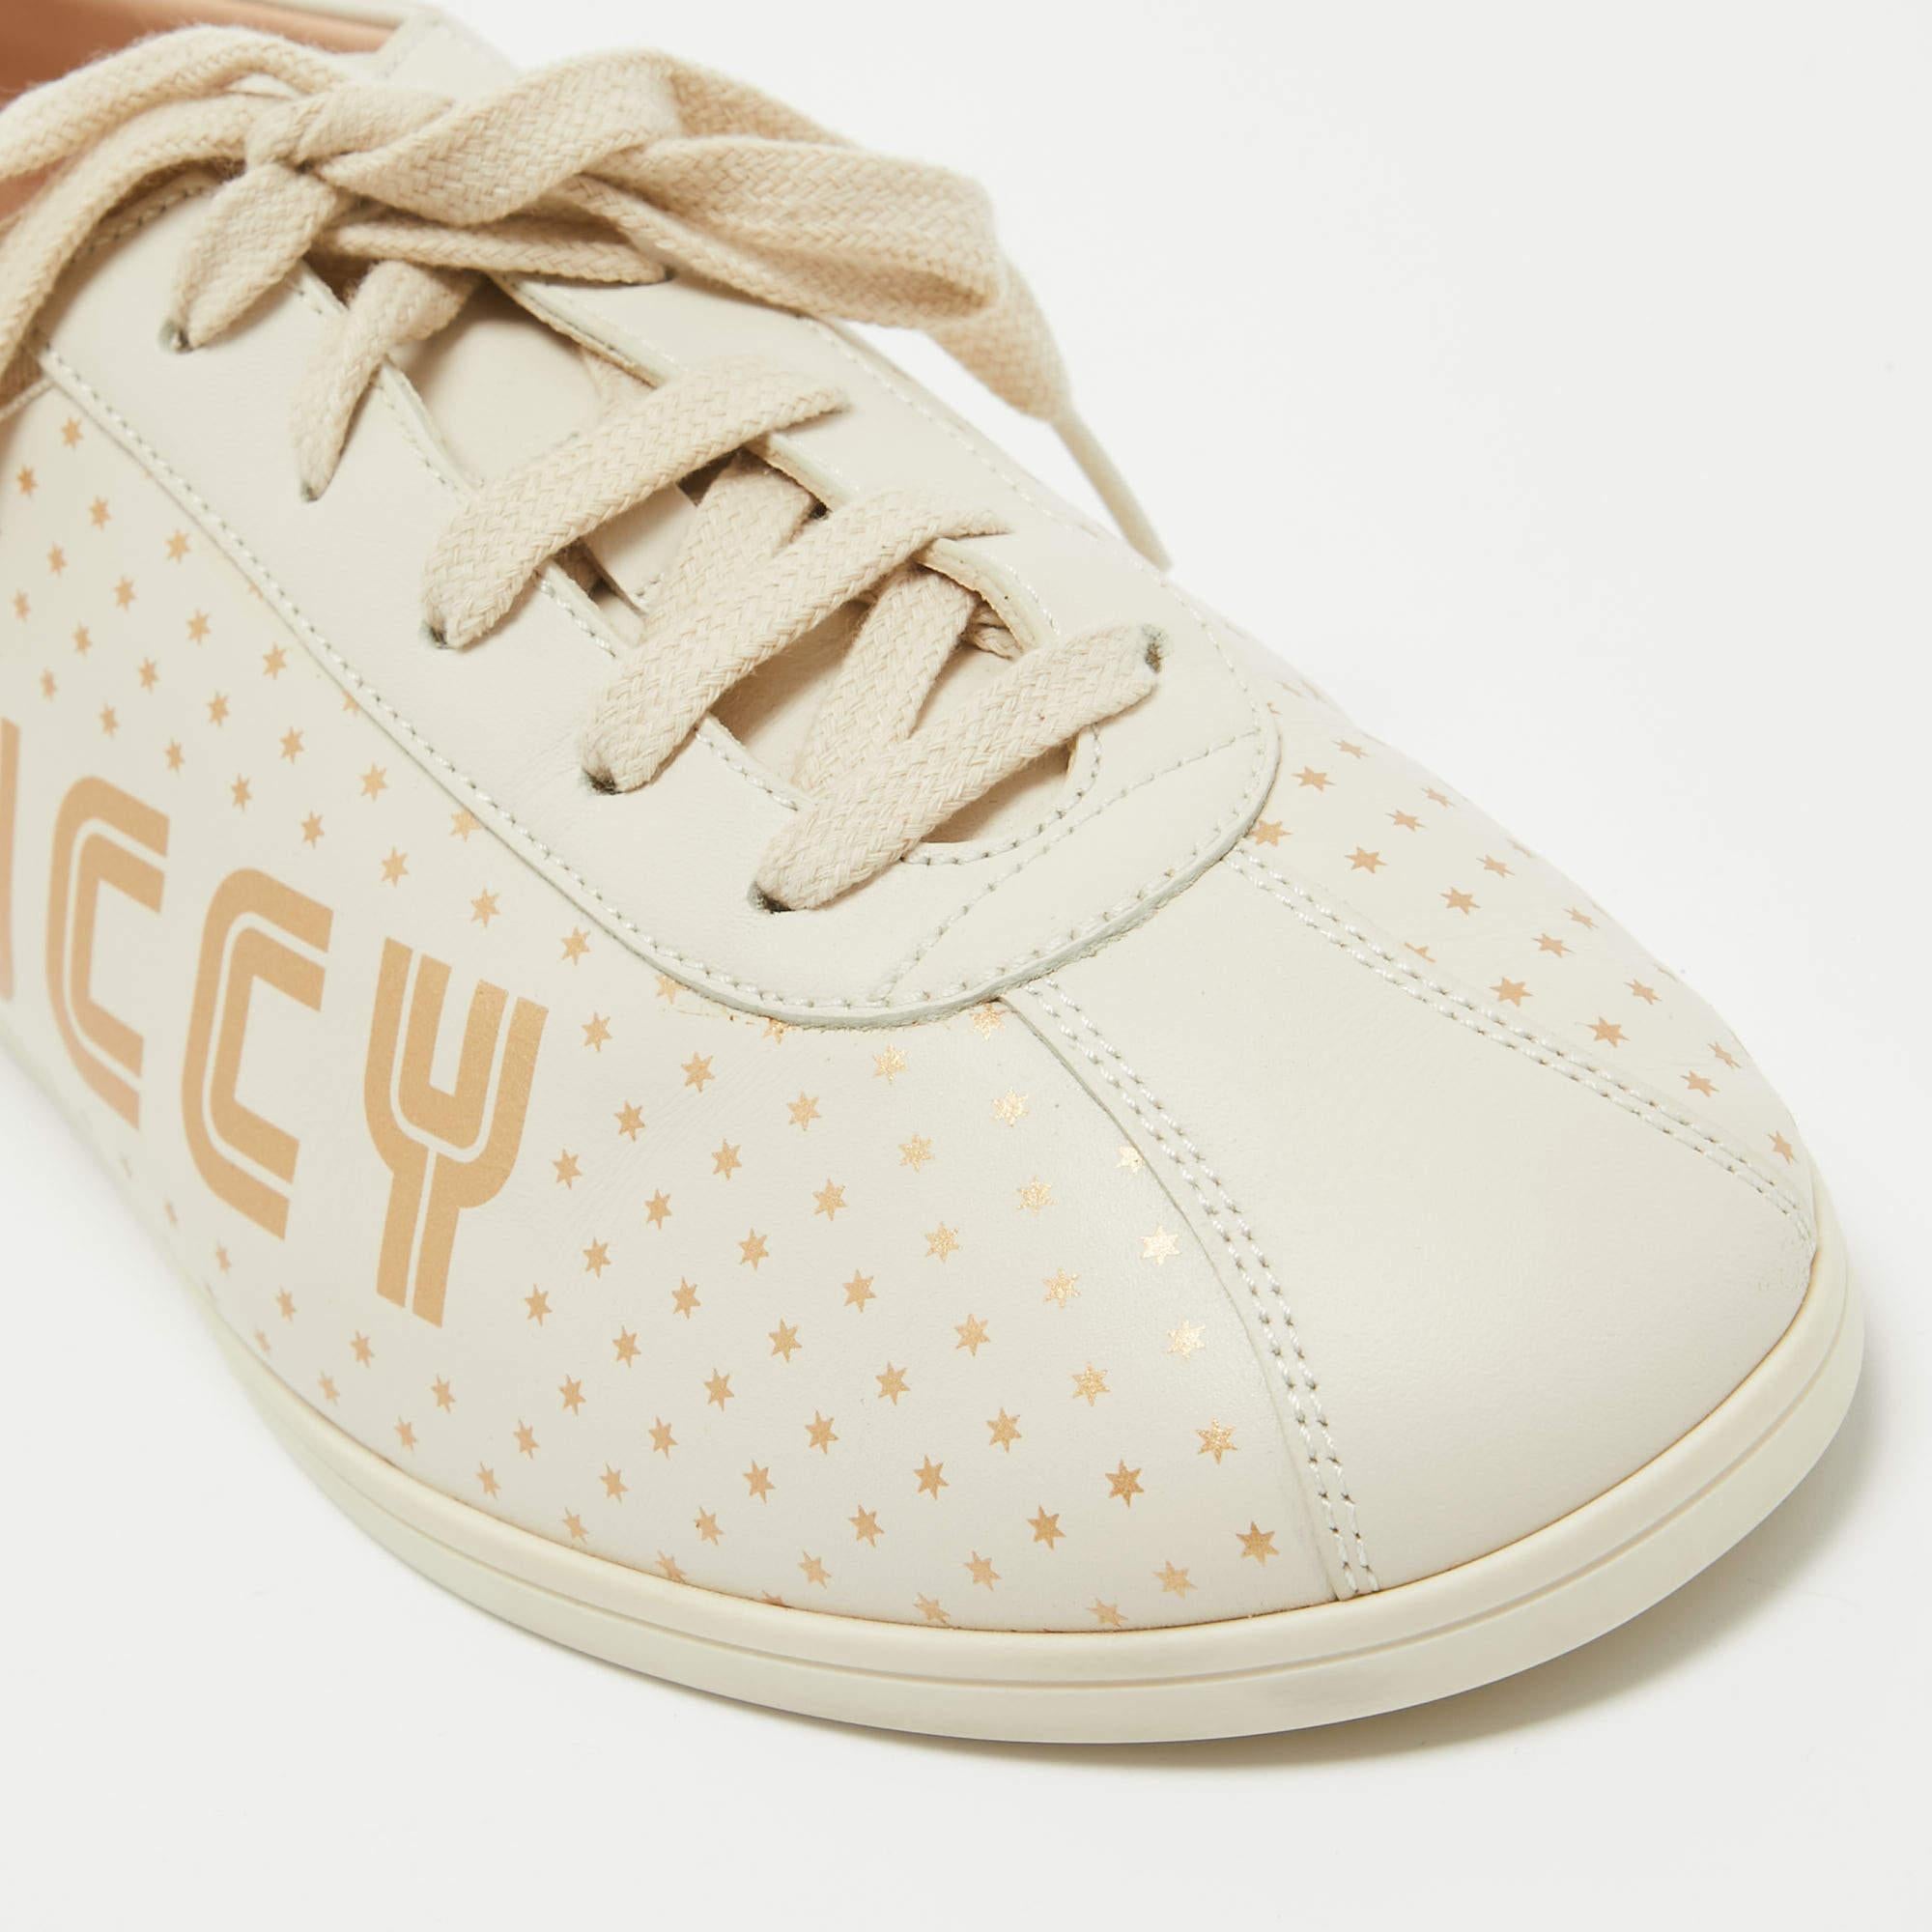 Gucci Cream Leather Falacer Low Top Sneakers Size 40 For Sale 1